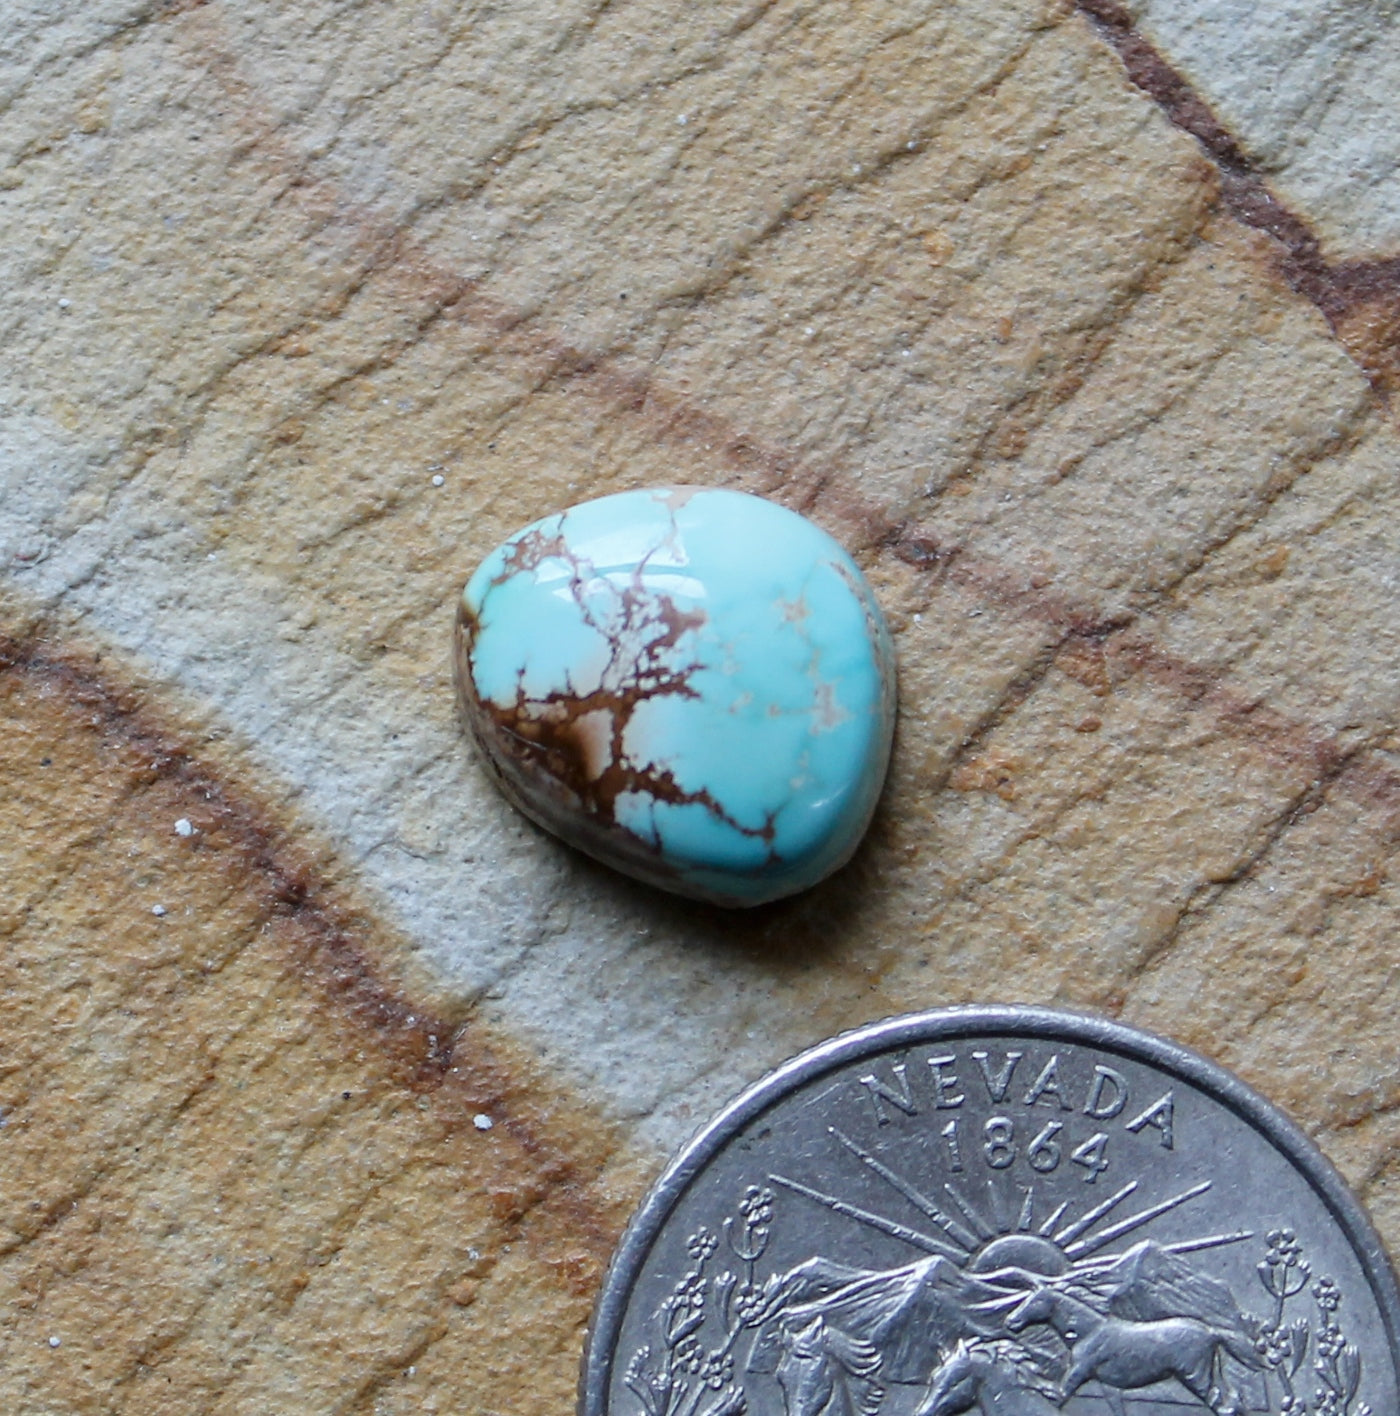 6 carat blue Stone Mountain Turquoise cabochon with red matrix